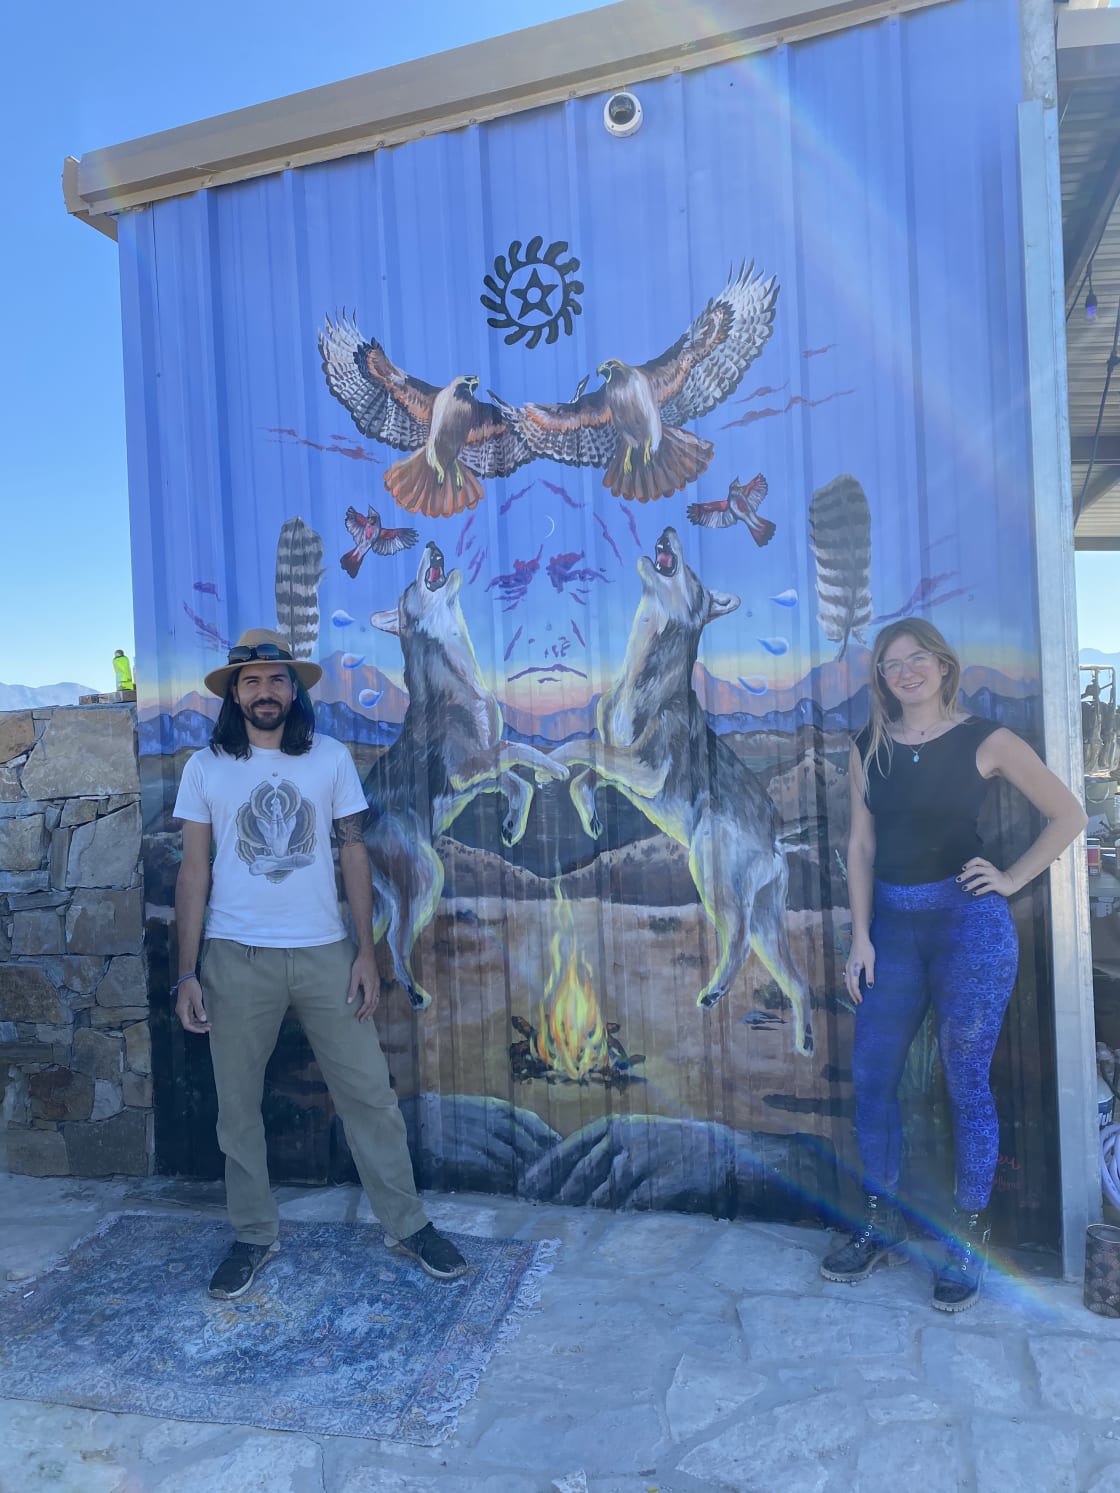 Amazing mural paying homage to original settlers painted by Juan Villegas & Rosemary Allen, two of Austin's most talented. A beautiful piece & such a treat to share.
